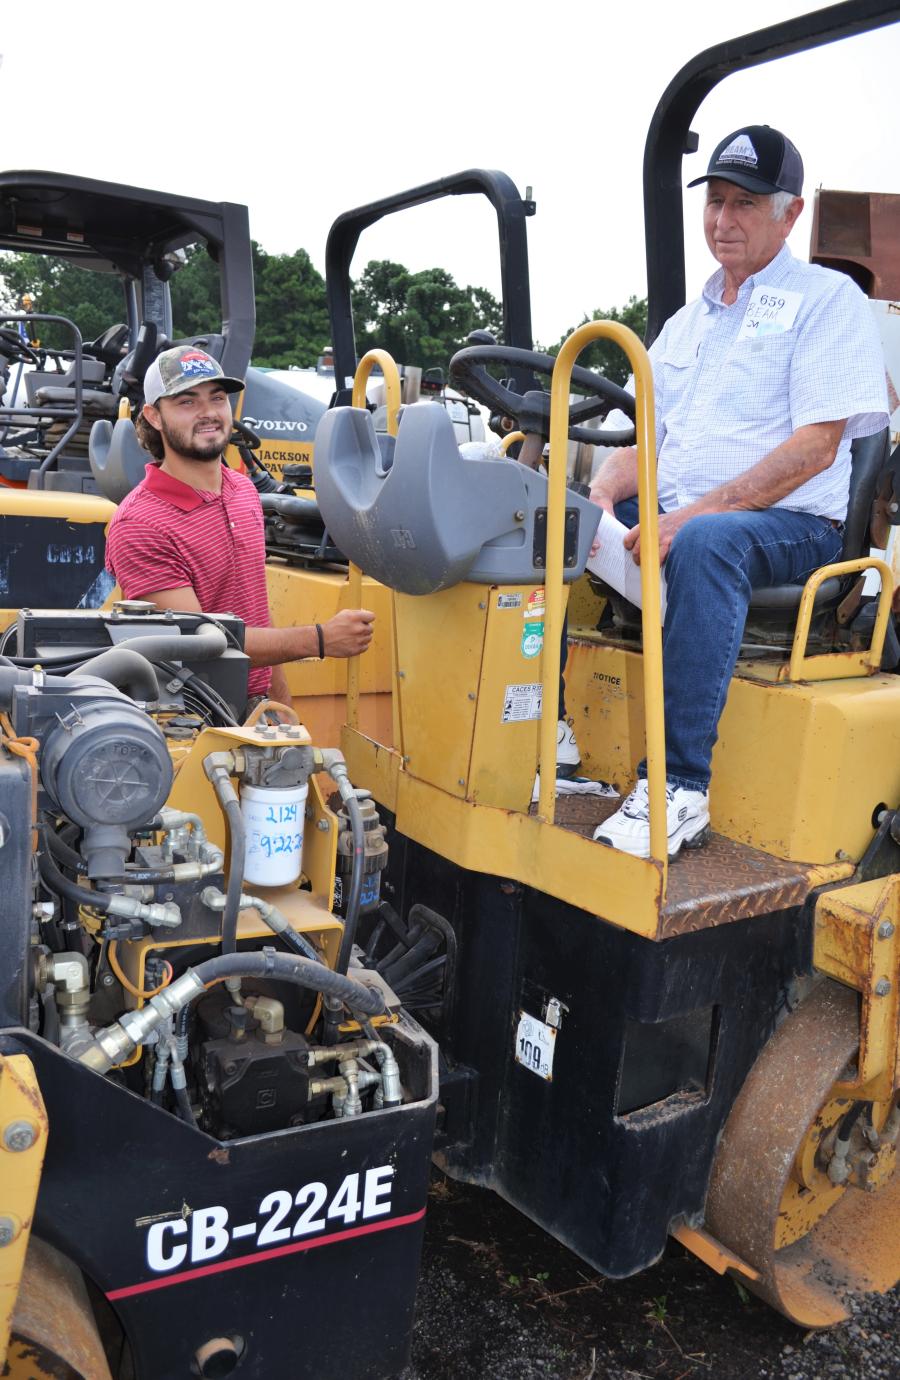 Nathan McGhee (L) and his grandfather, Johnny Beam of Beam’s Contracting, Augusta, Ga., inspect a Cat CB-224E compactor of interest.